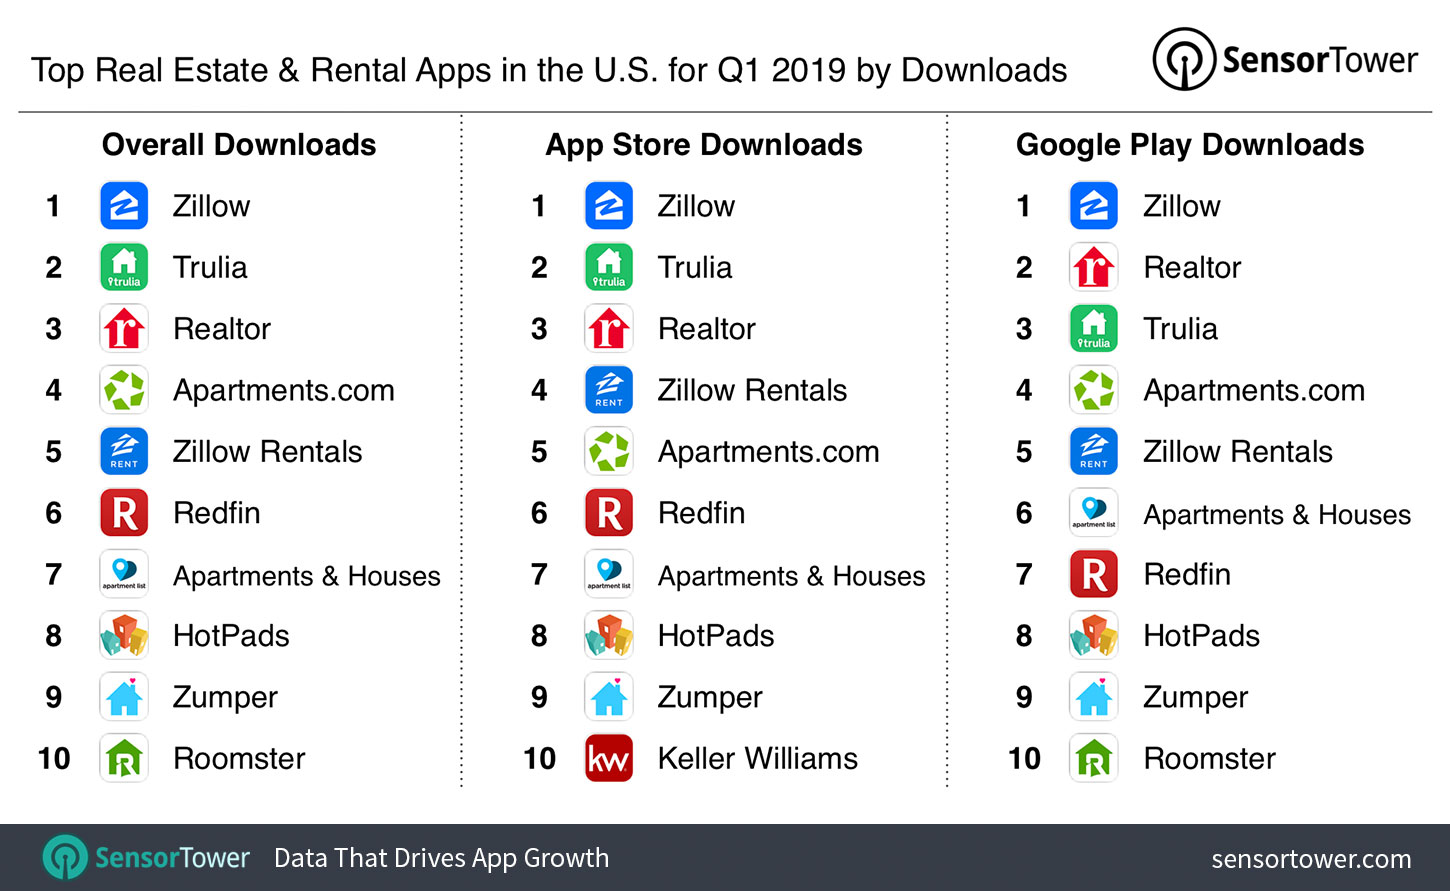 Top Real Estate and Rental Apps in the U.S. for Q1 2019 by Downloads